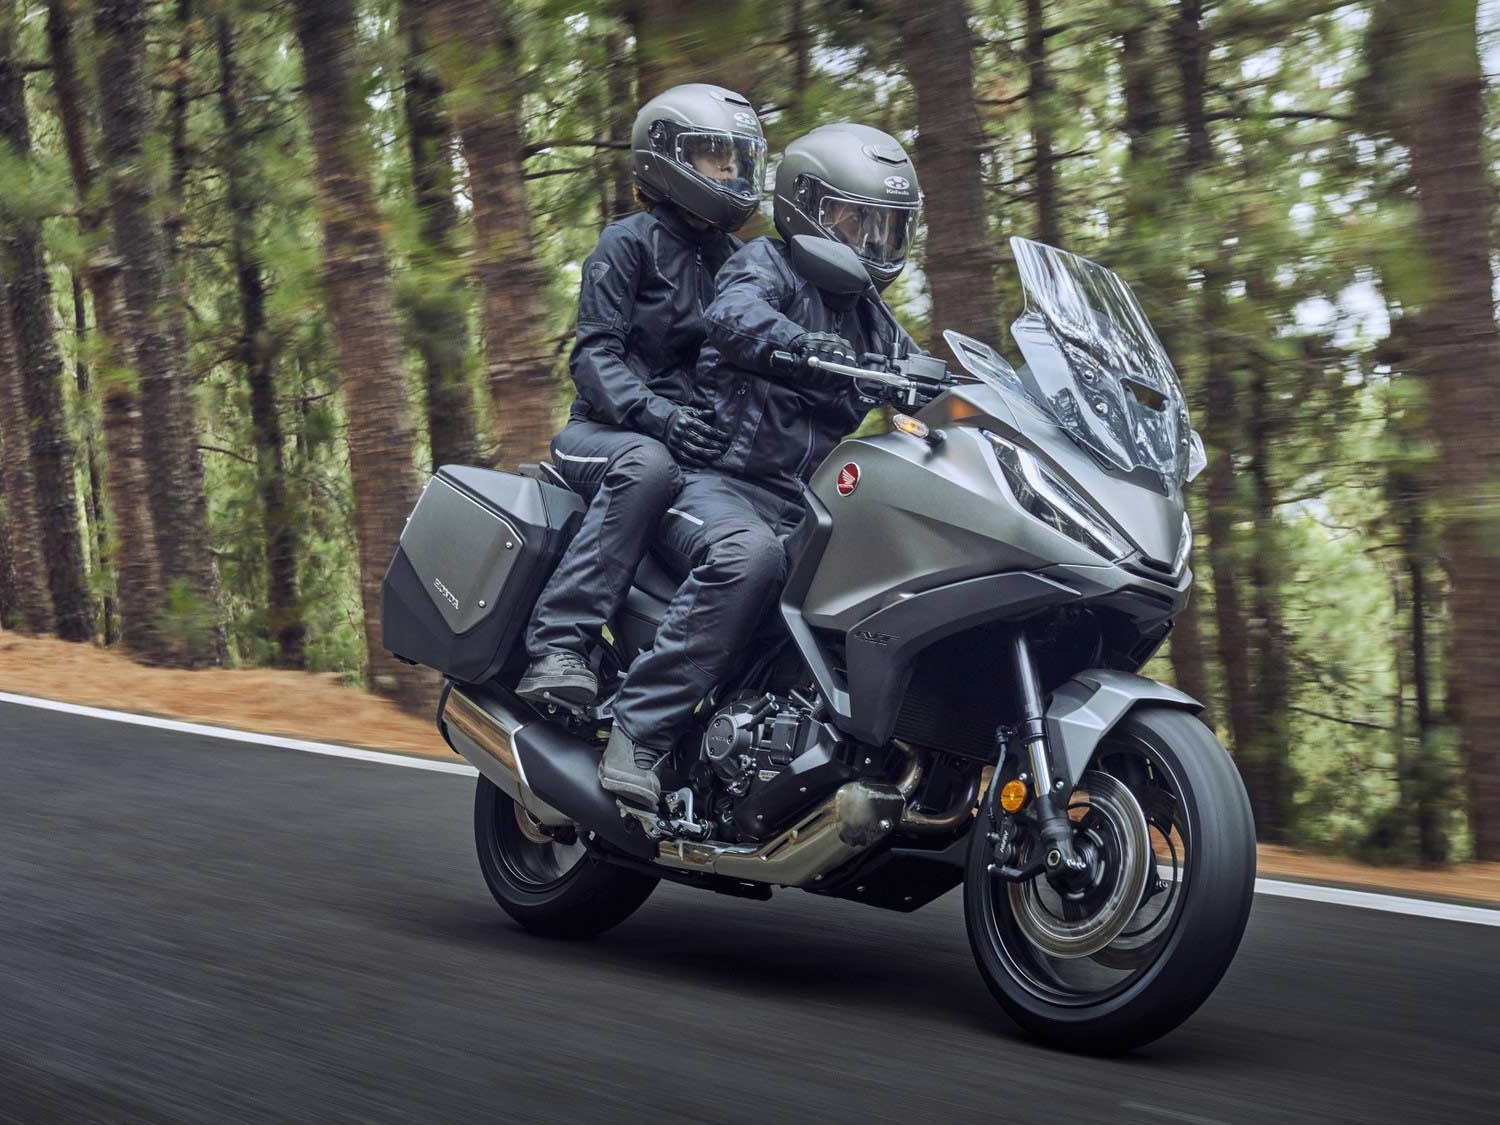 Best Sport Touring Motorcycle For Two Up Riding Reviewmotors.co